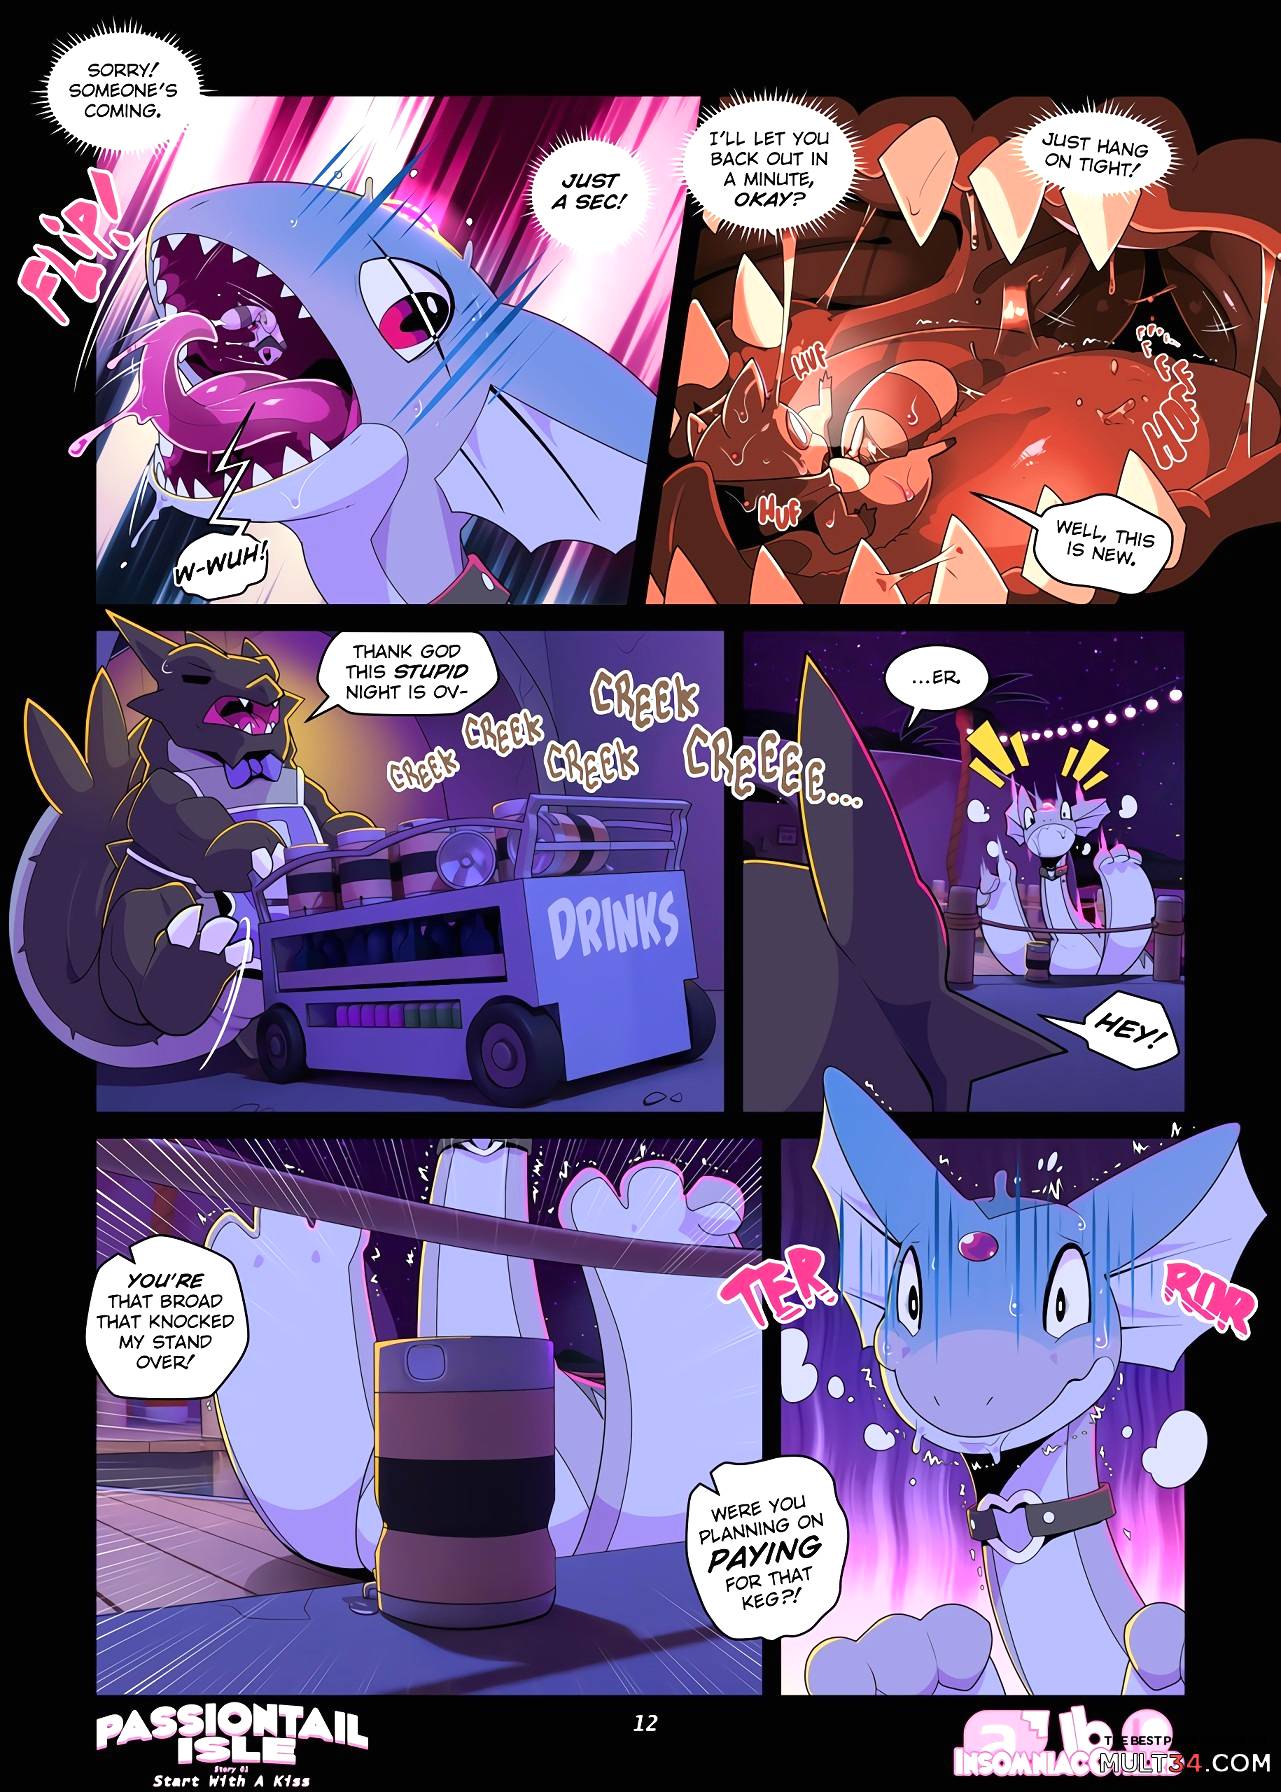 Passiontail Isle by Insomniacovrlrd page 13